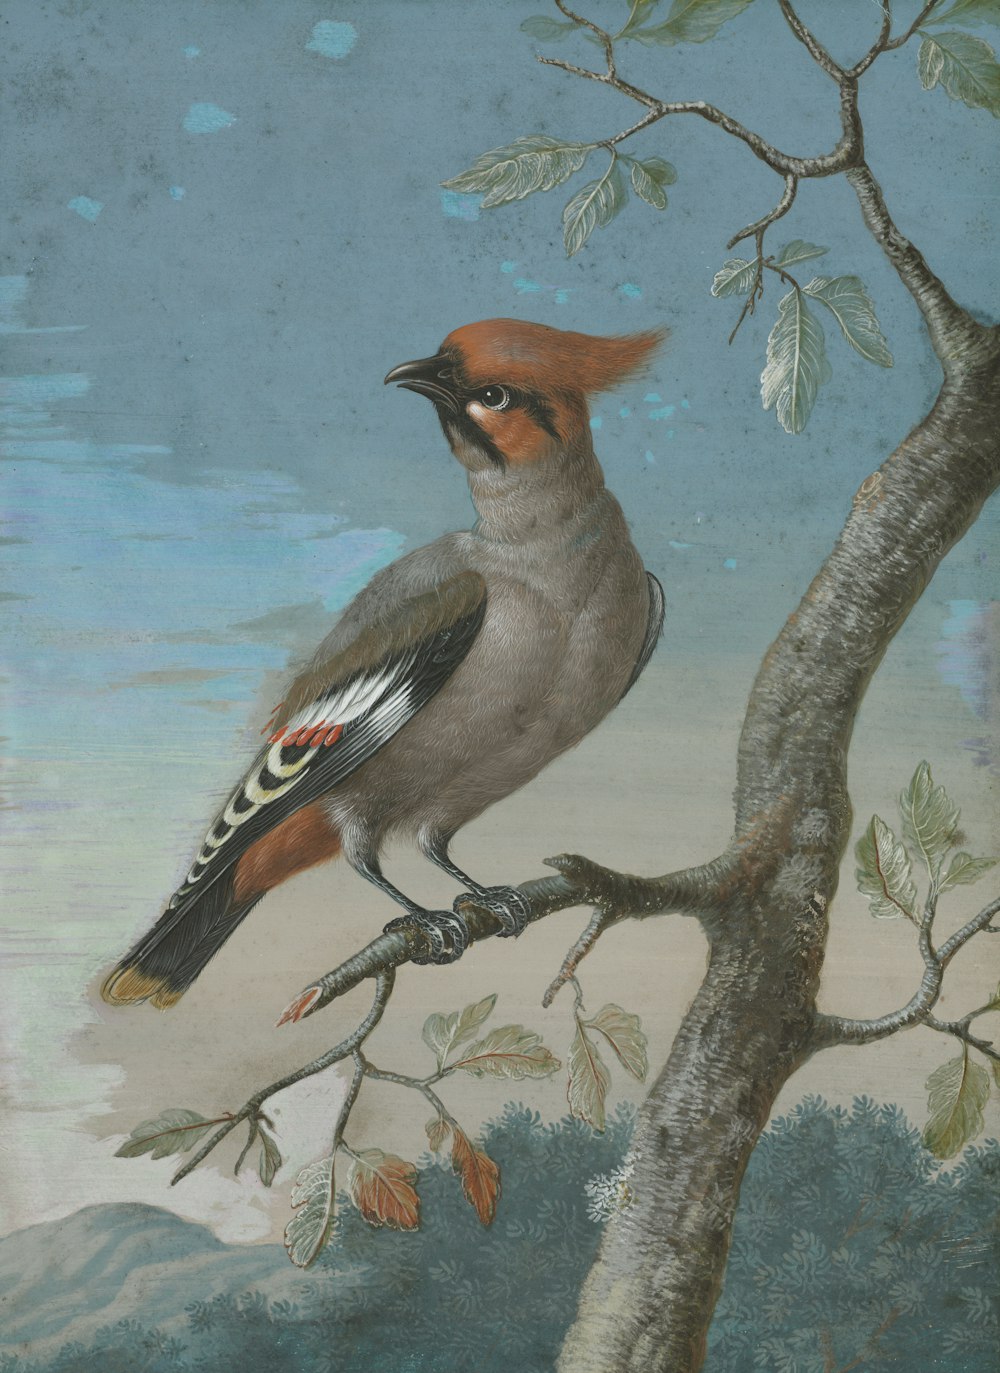 a painting of a bird perched on a tree branch